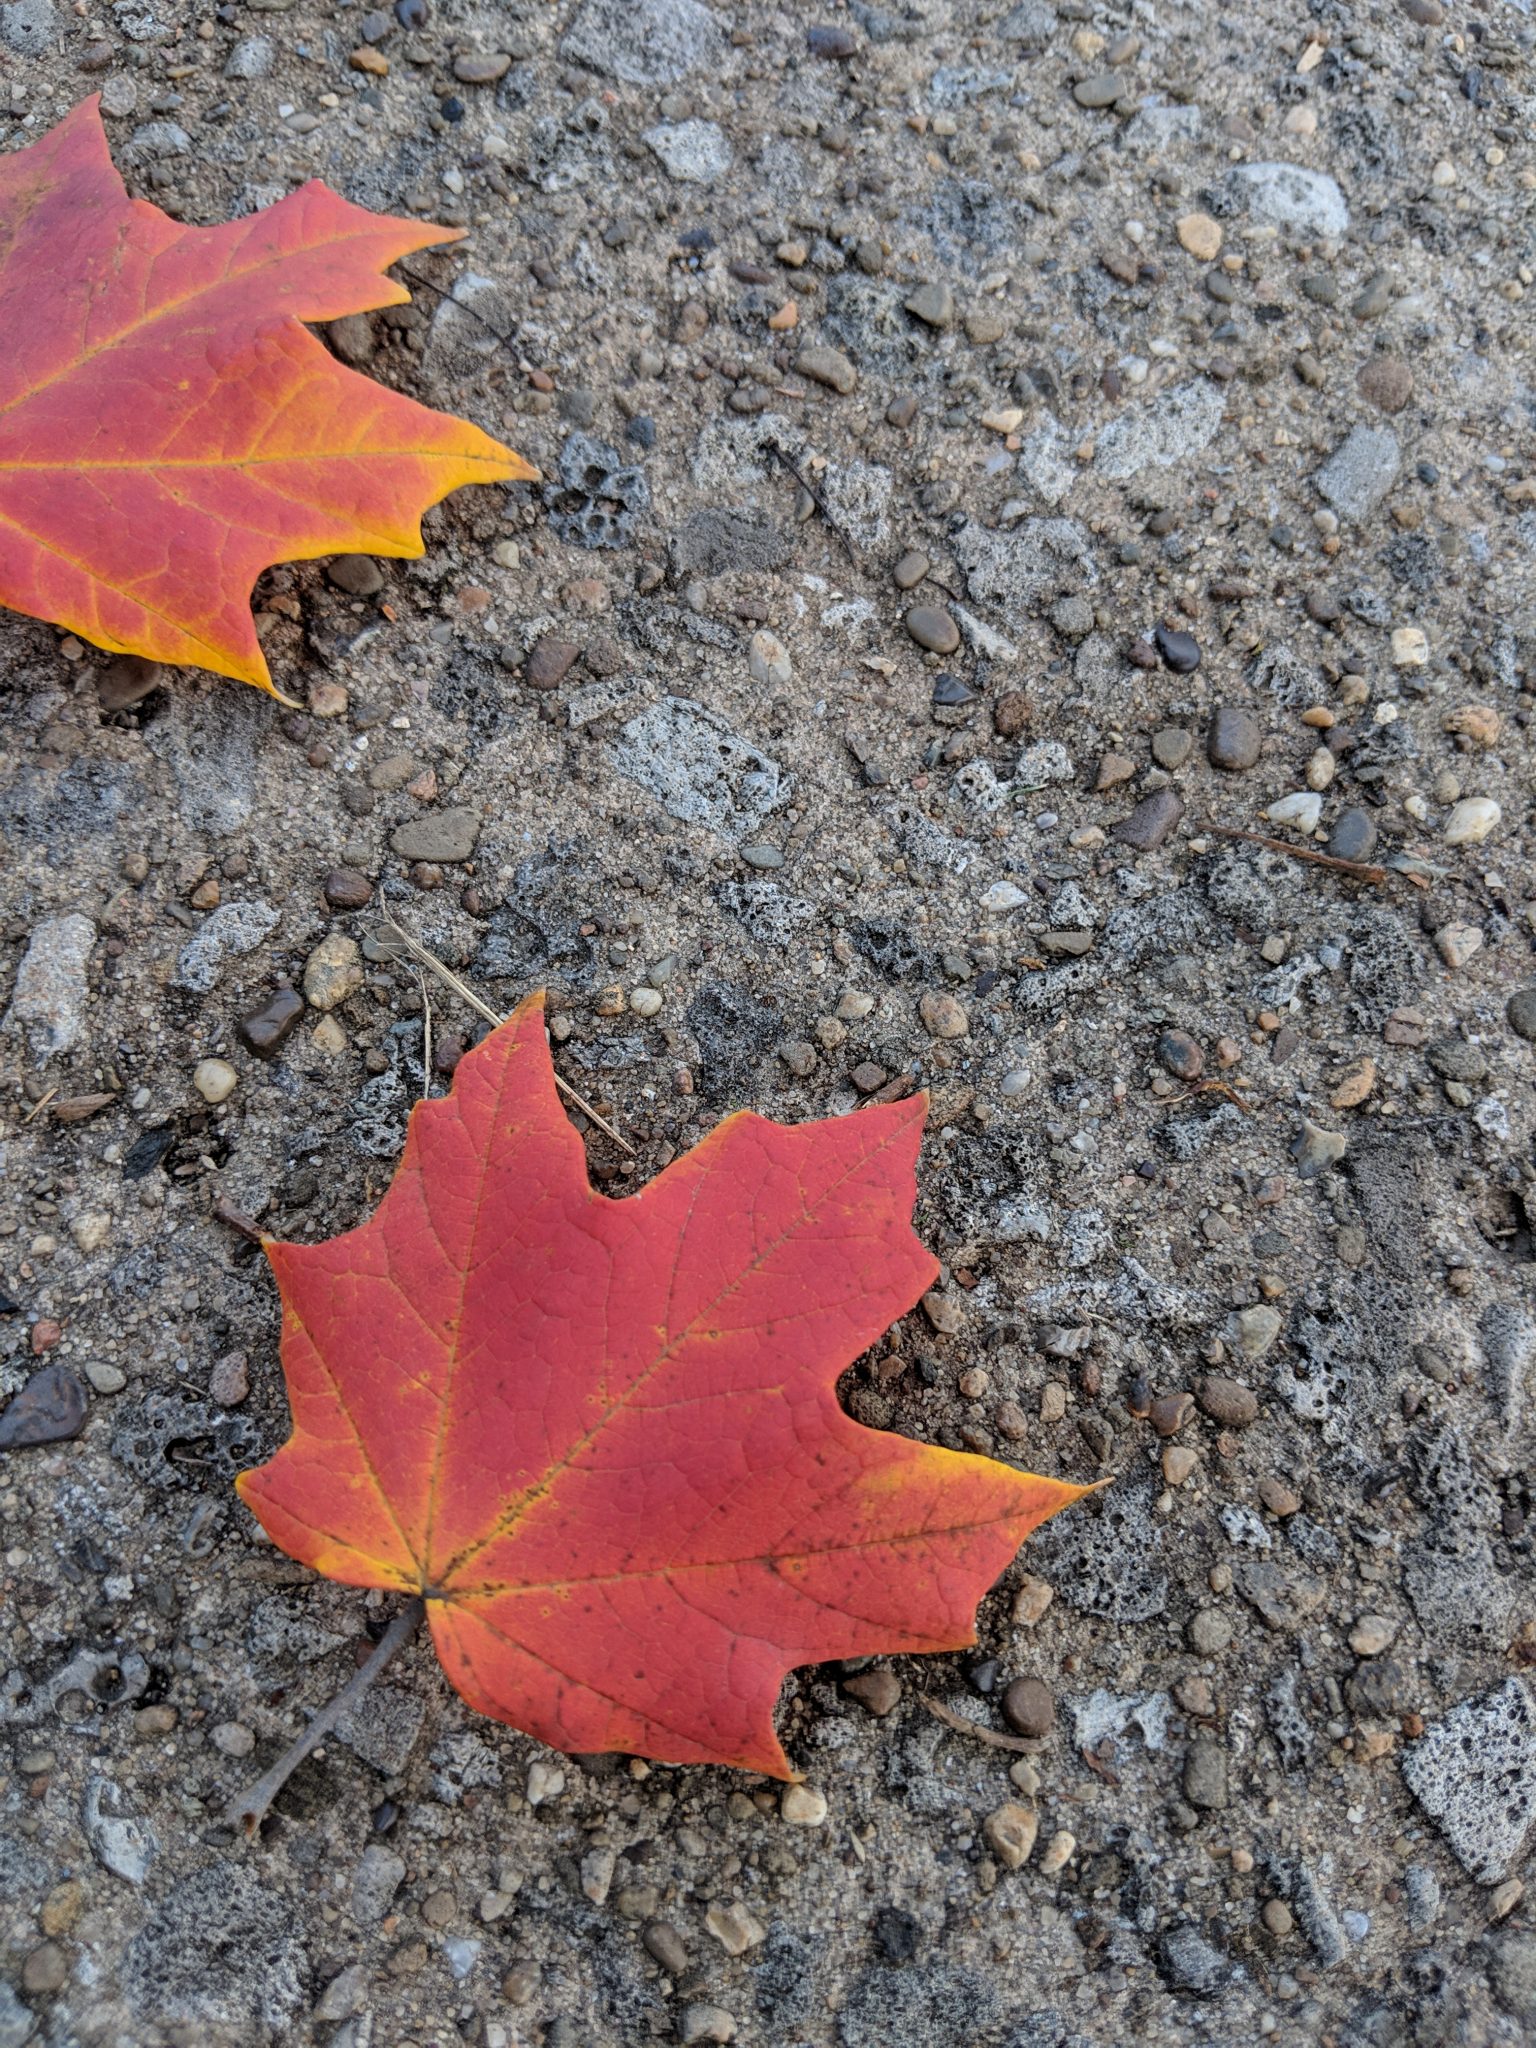 Red and yellow leaves on the ground.